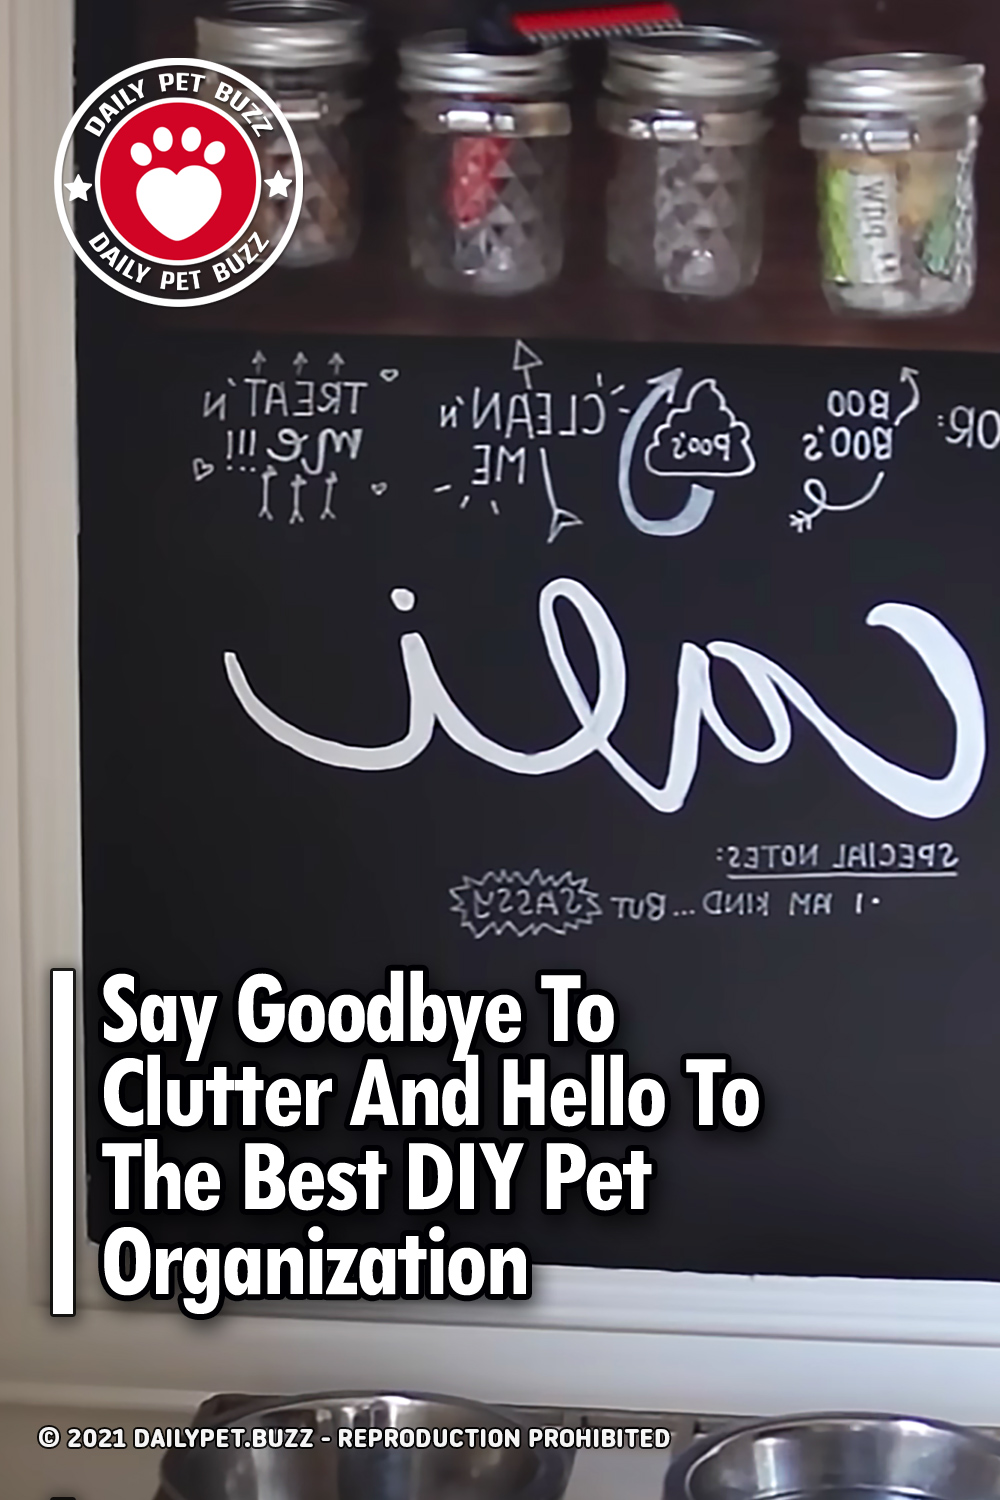 Say Goodbye To Clutter And Hello To The Best DIY Pet Organization